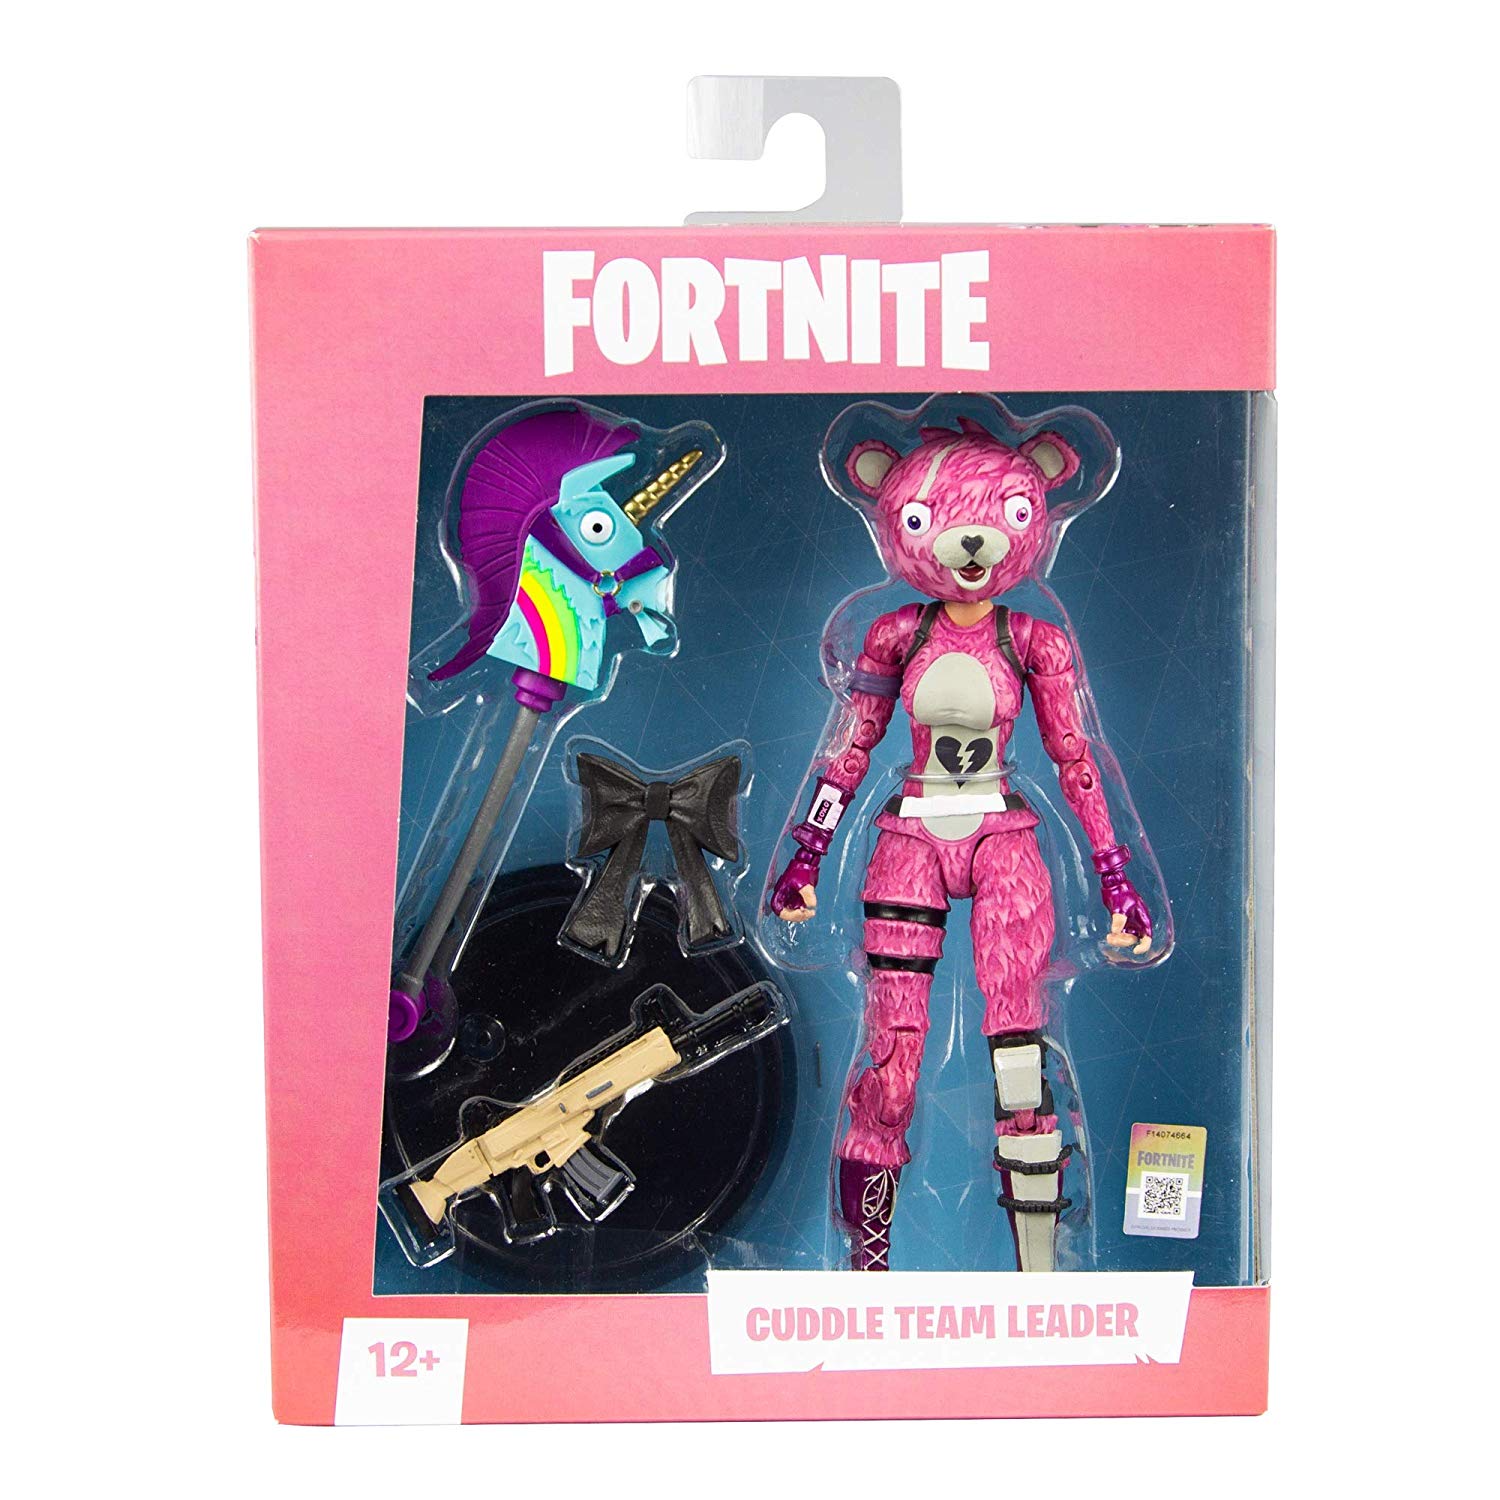 characters Fortnite Action Figures Toy Range by McFarlane Toys NEW & BOXED 20 